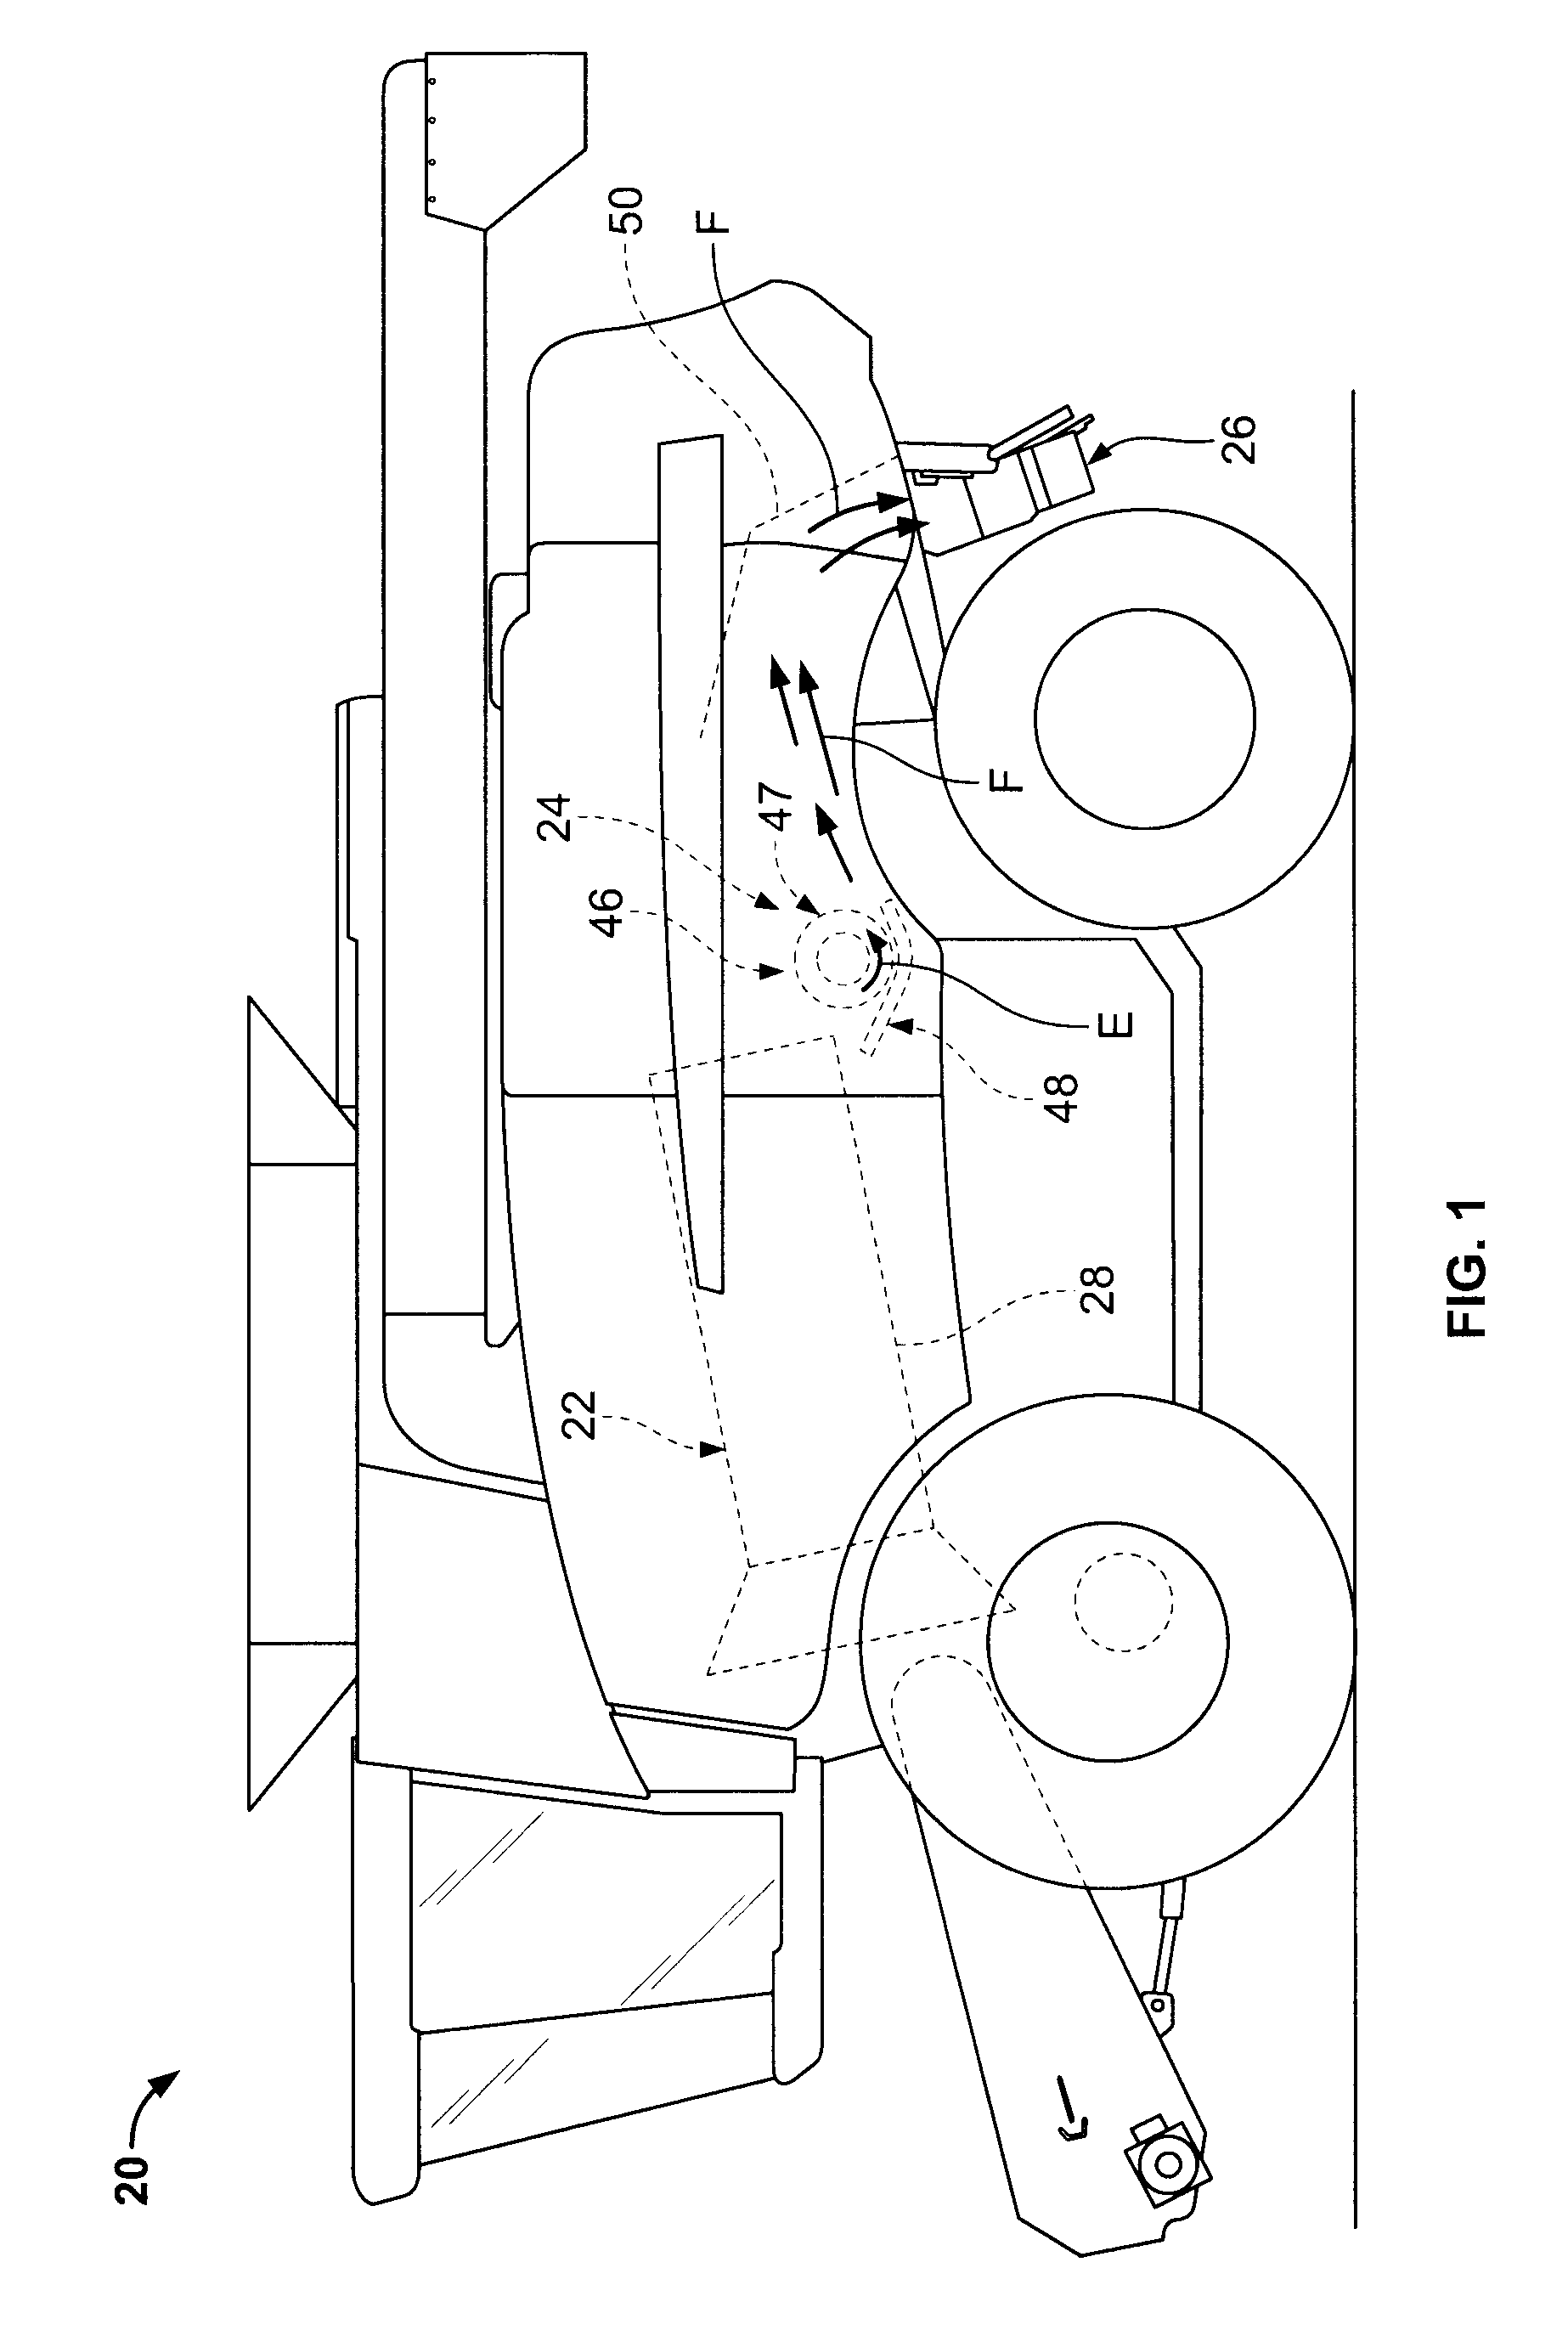 Remotely positionable interruption plate